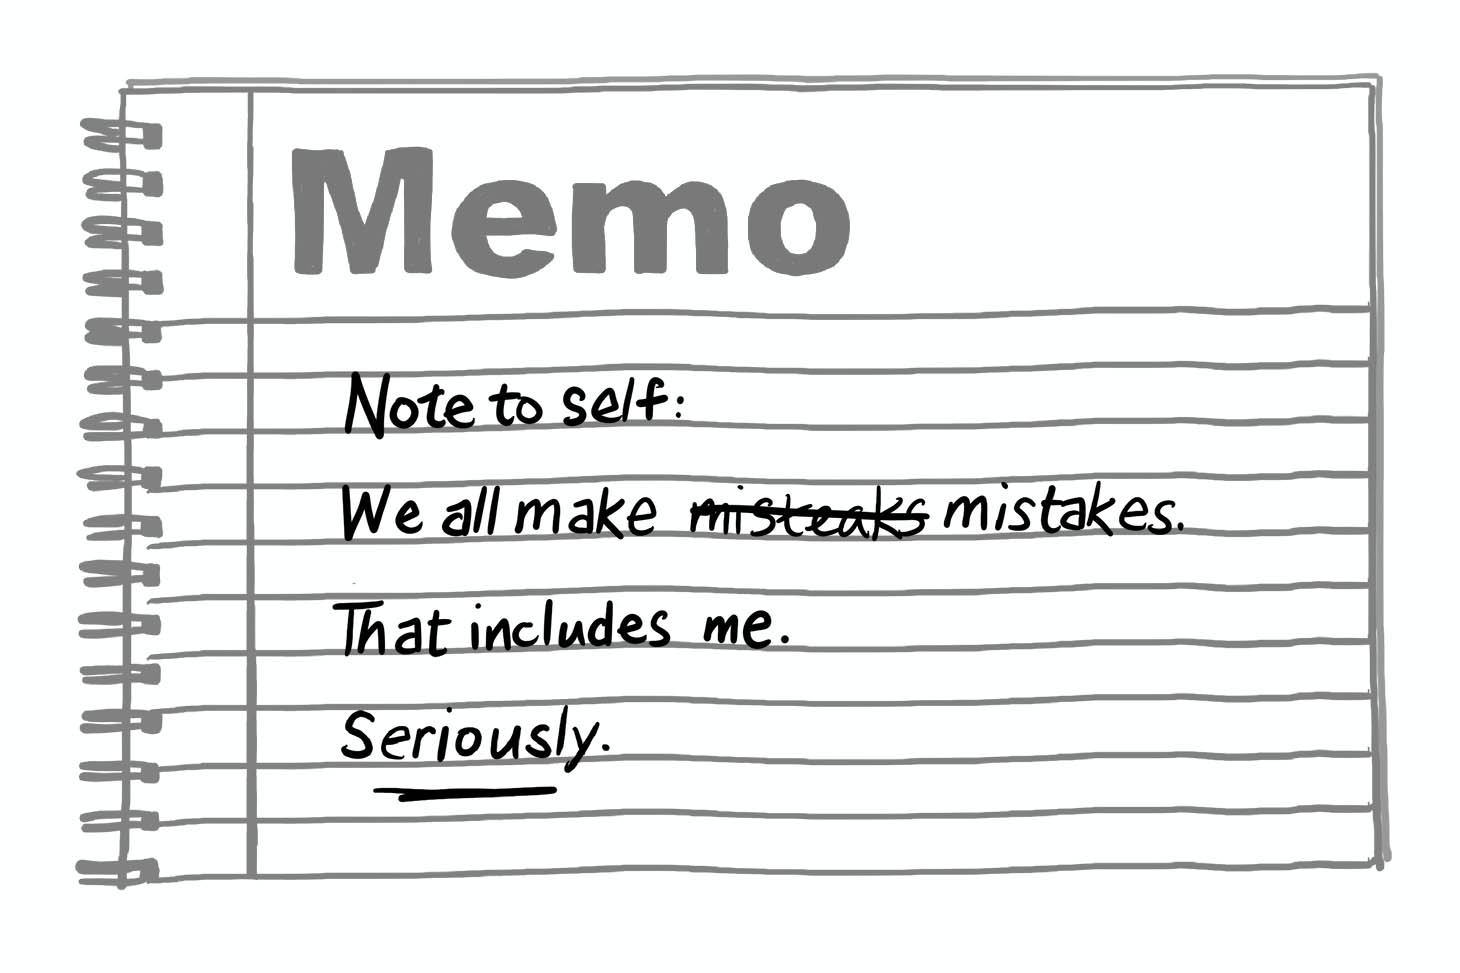 A note to self that we all make mistakes